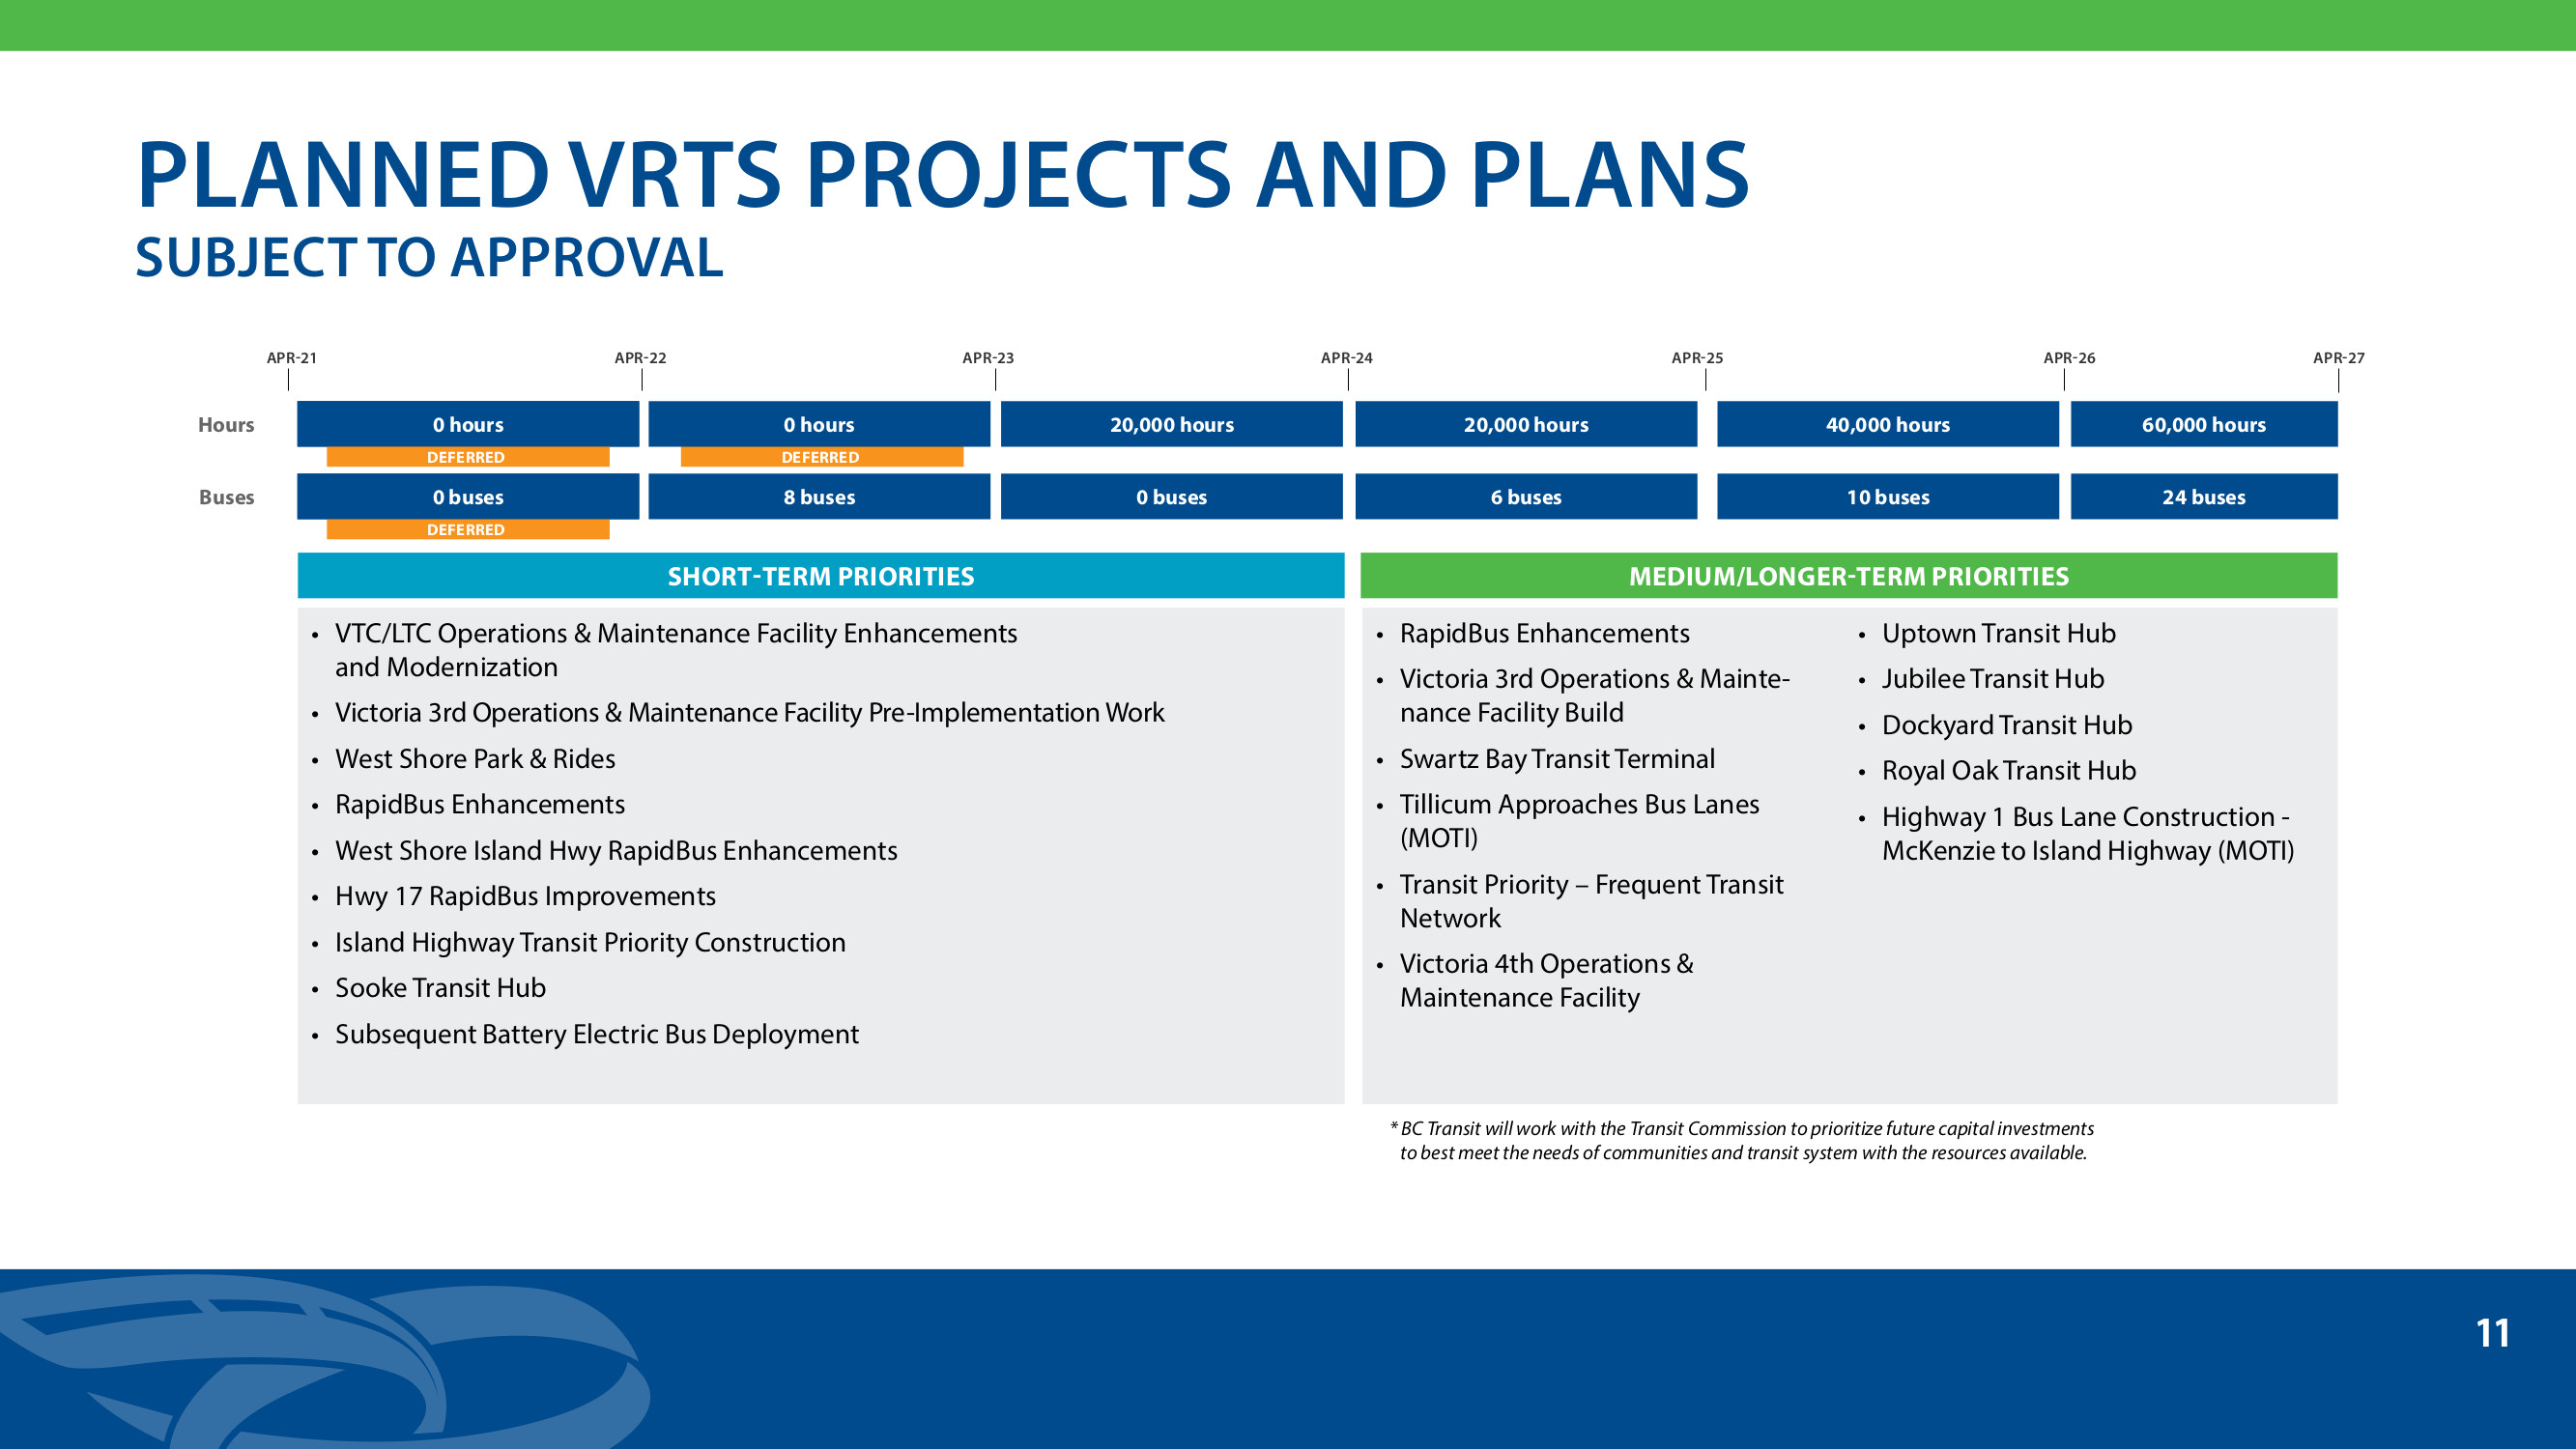 VRTS 10 Year Vision Planned Projects and Plans 2022